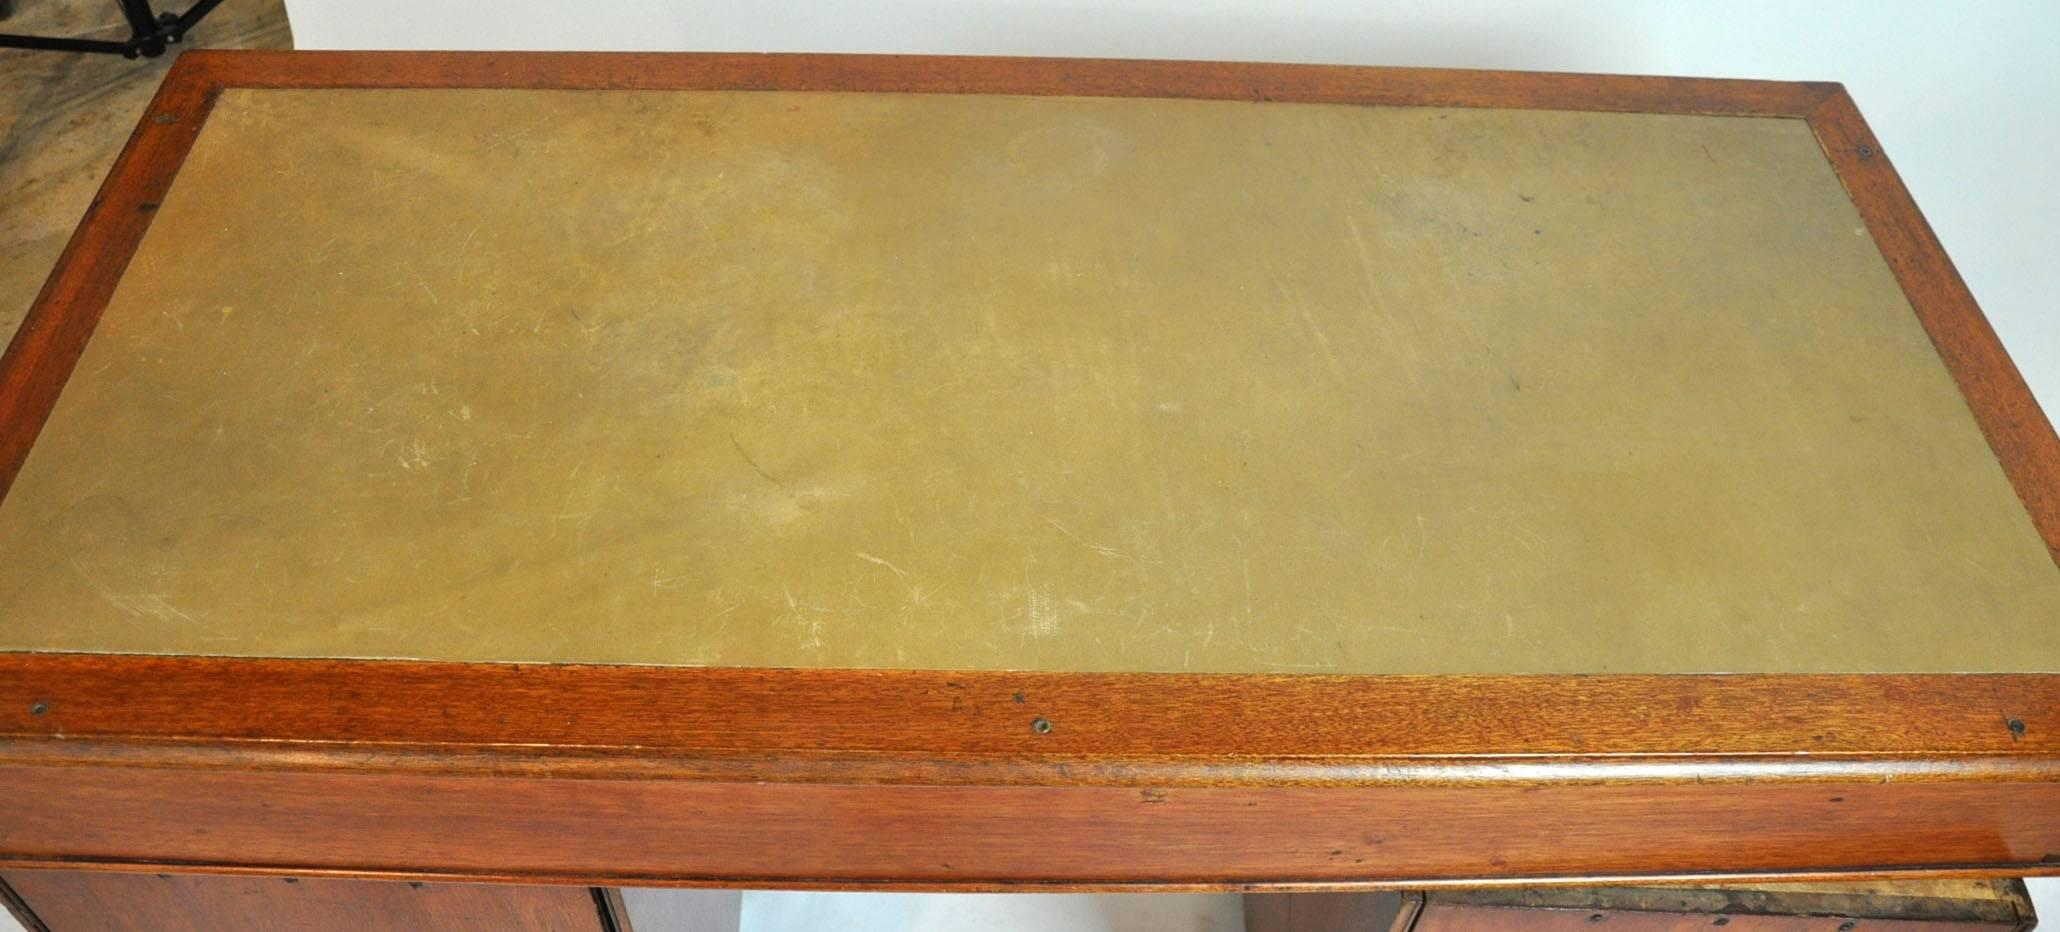 19th Century English Campaign Pedestal Kneehole Desk with Leather Top